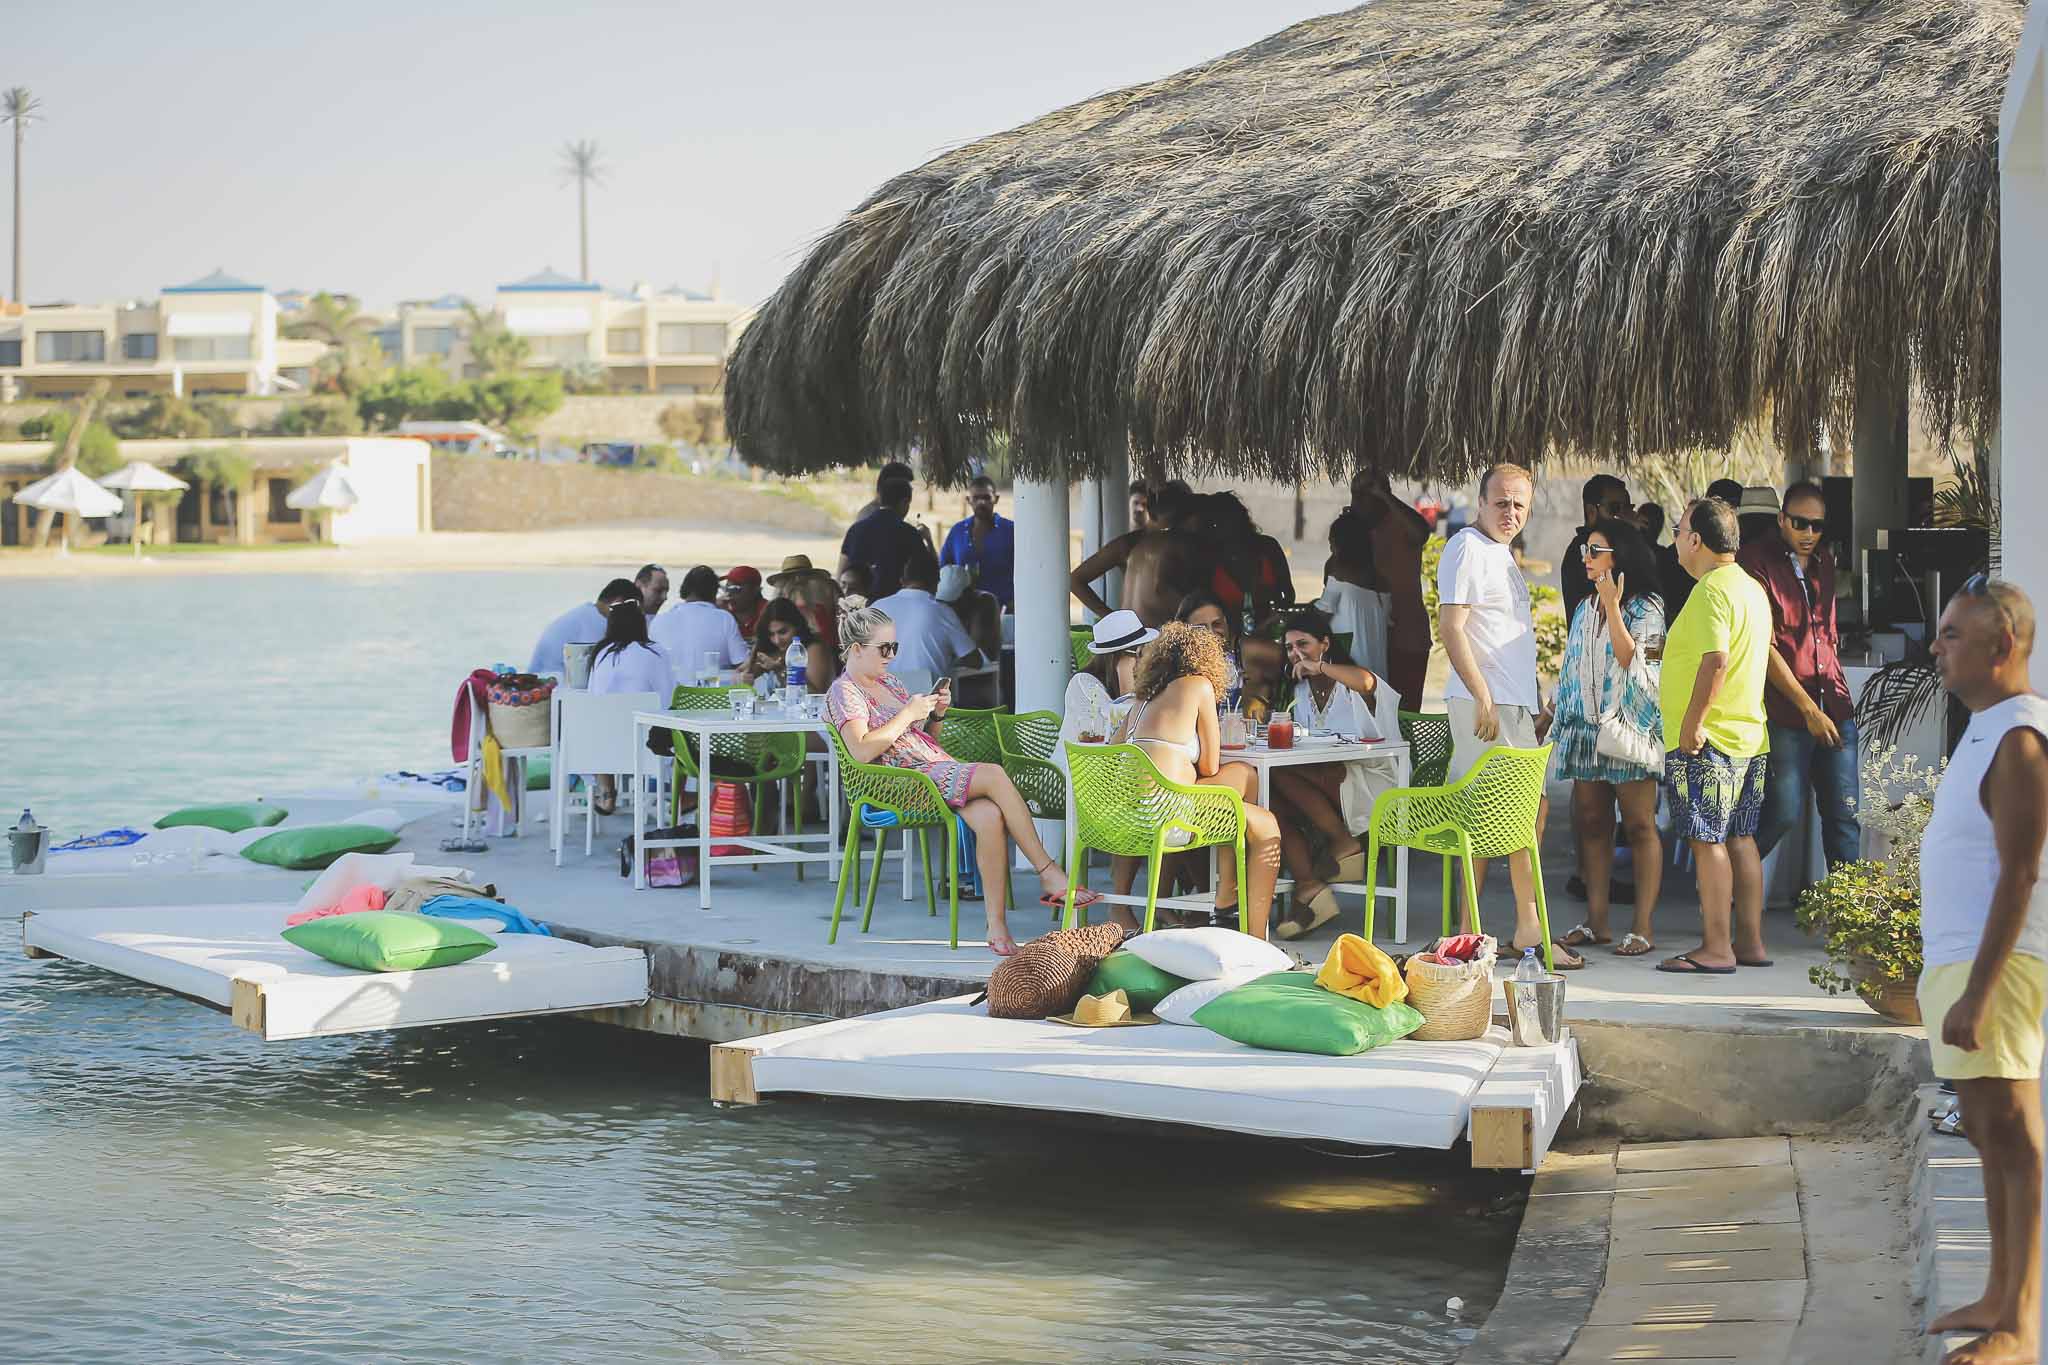 This New Sahel Beach Bar is Set to Be The Season's Hottest Hangout Spot